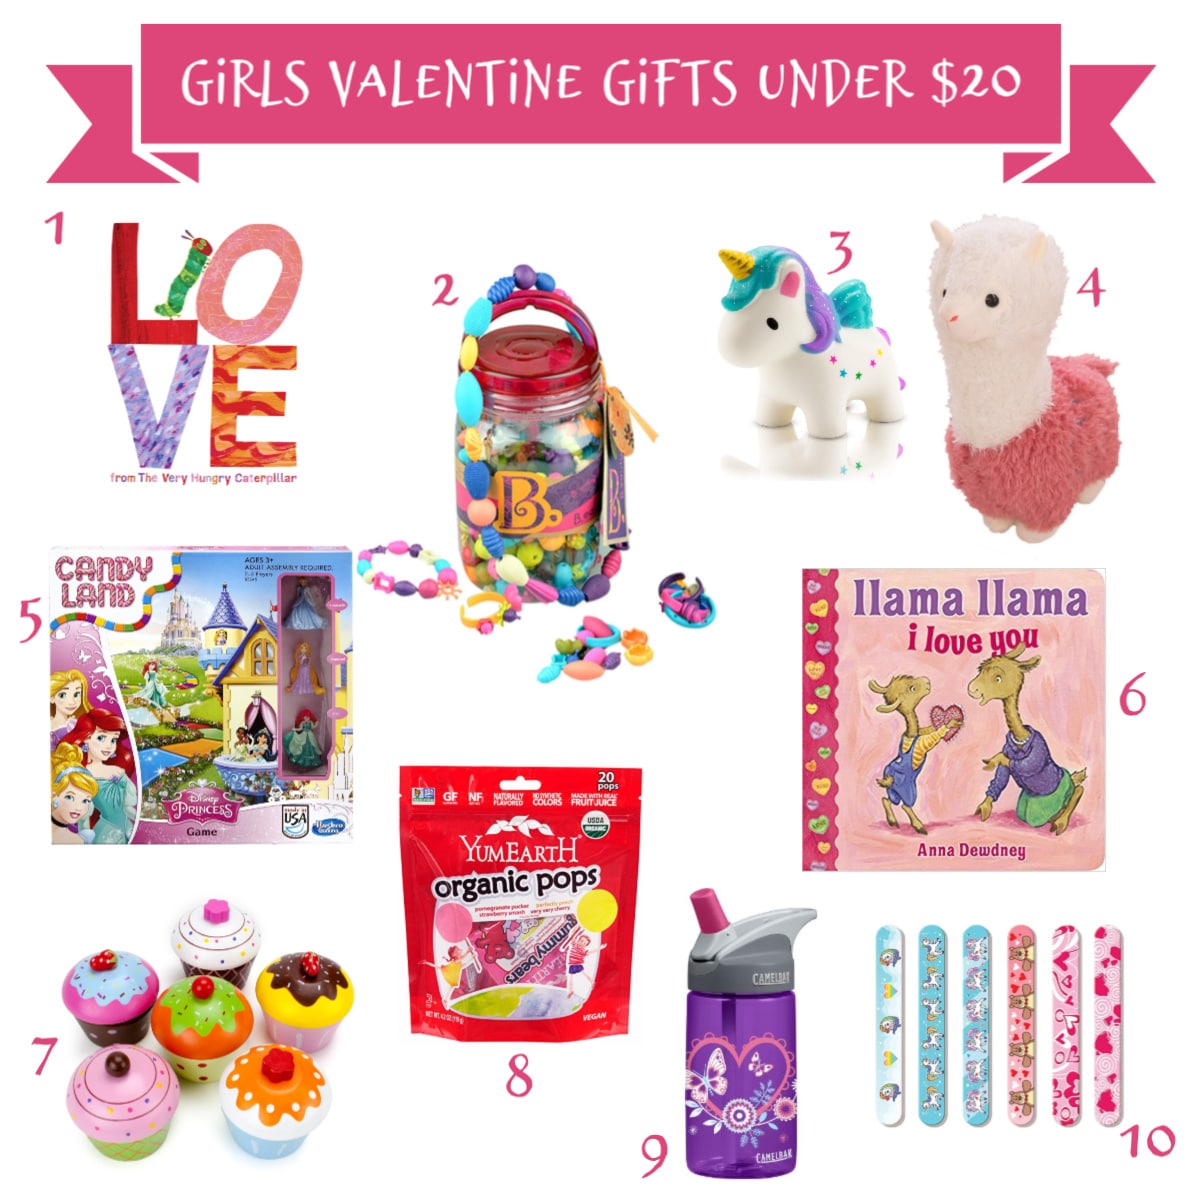 Top 10 Valentine's Gifts for Girls Under $20 on Amazon Prime